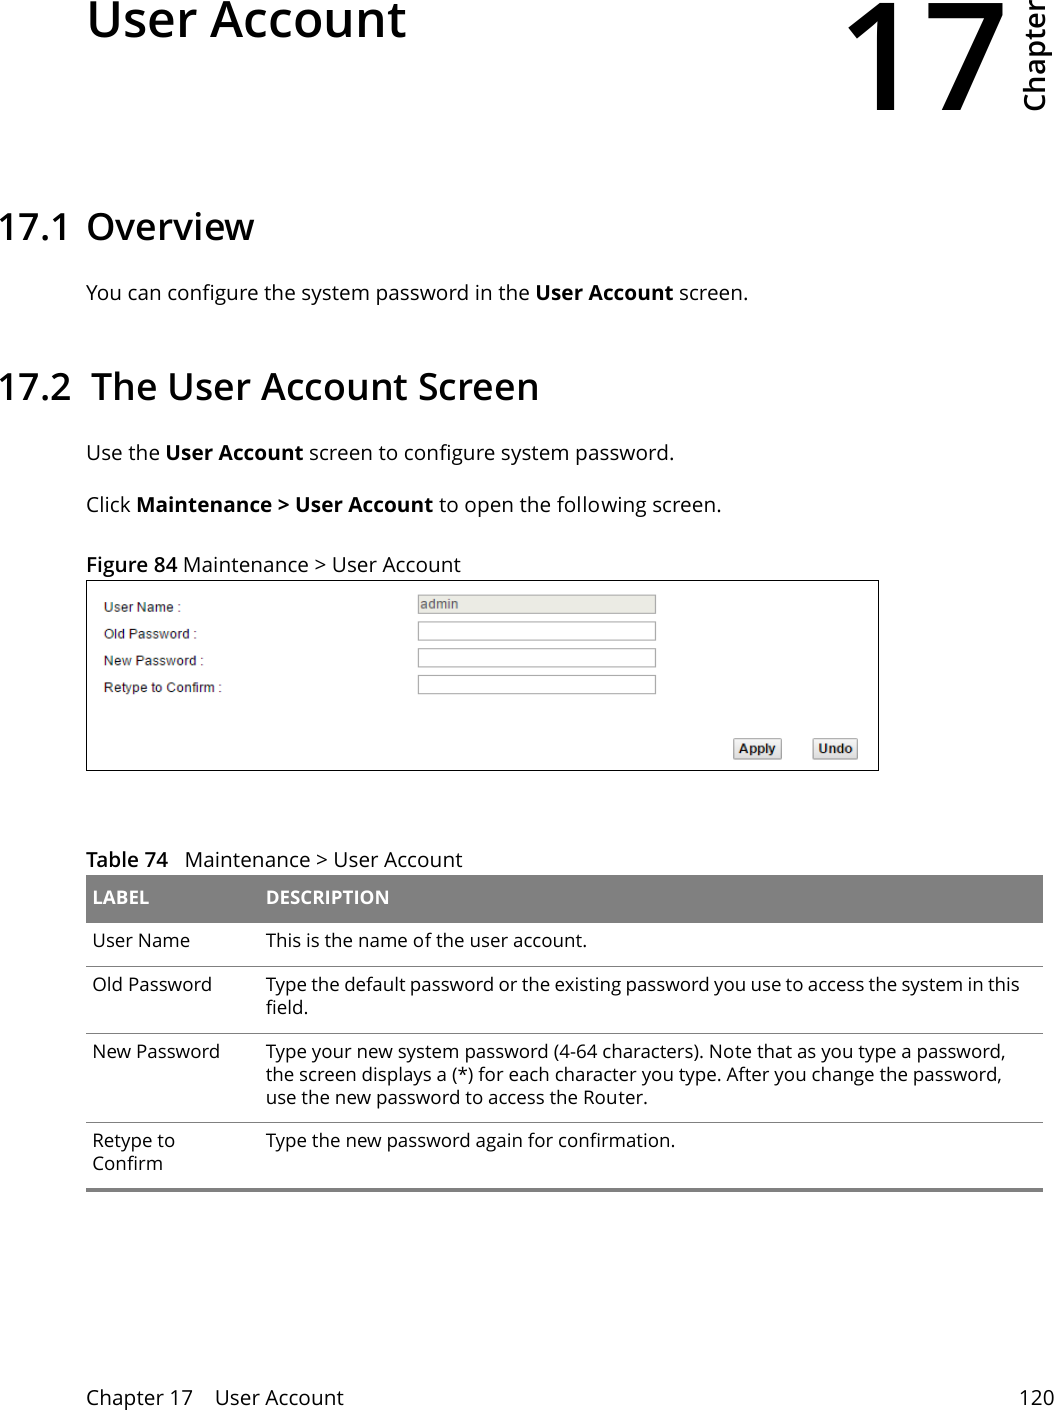 17Chapter Chapter 17    User Account 120CHAPTER 17 Chapter 17 User Account17.1 Overview You can configure the system password in the User Account screen.17.2  The User Account ScreenUse the User Account screen to configure system password.Click Maintenance &gt; User Account to open the following screen. Figure 84 Maintenance &gt; User Account Table 74   Maintenance &gt; User Account LABEL DESCRIPTIONUser Name This is the name of the user account.Old Password Type the default password or the existing password you use to access the system in this field.New Password Type your new system password (4-64 characters). Note that as you type a password, the screen displays a (*) for each character you type. After you change the password, use the new password to access the Router.Retype to ConfirmType the new password again for confirmation.